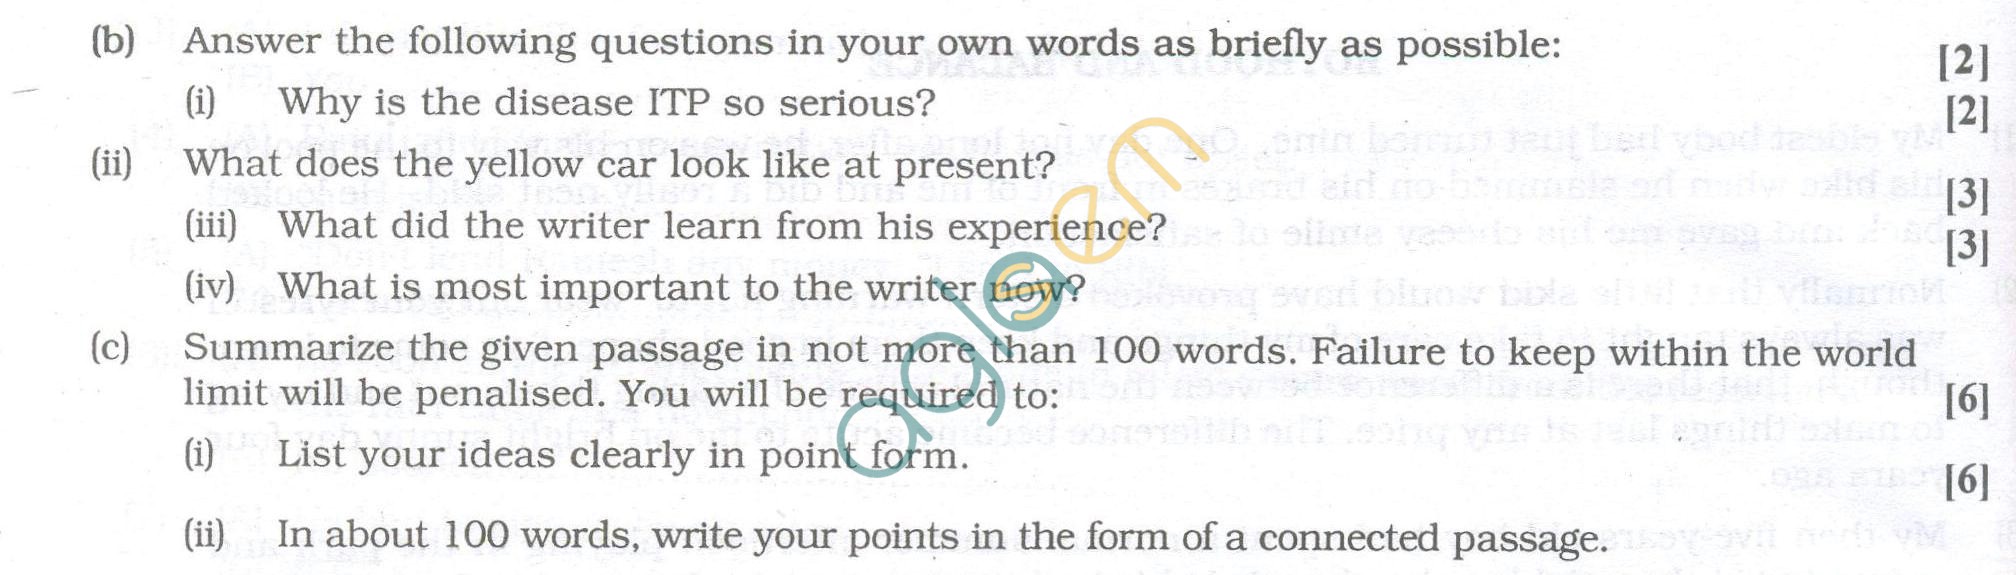 ISC Question Papers 2013 for Class 12 - English Paper 1